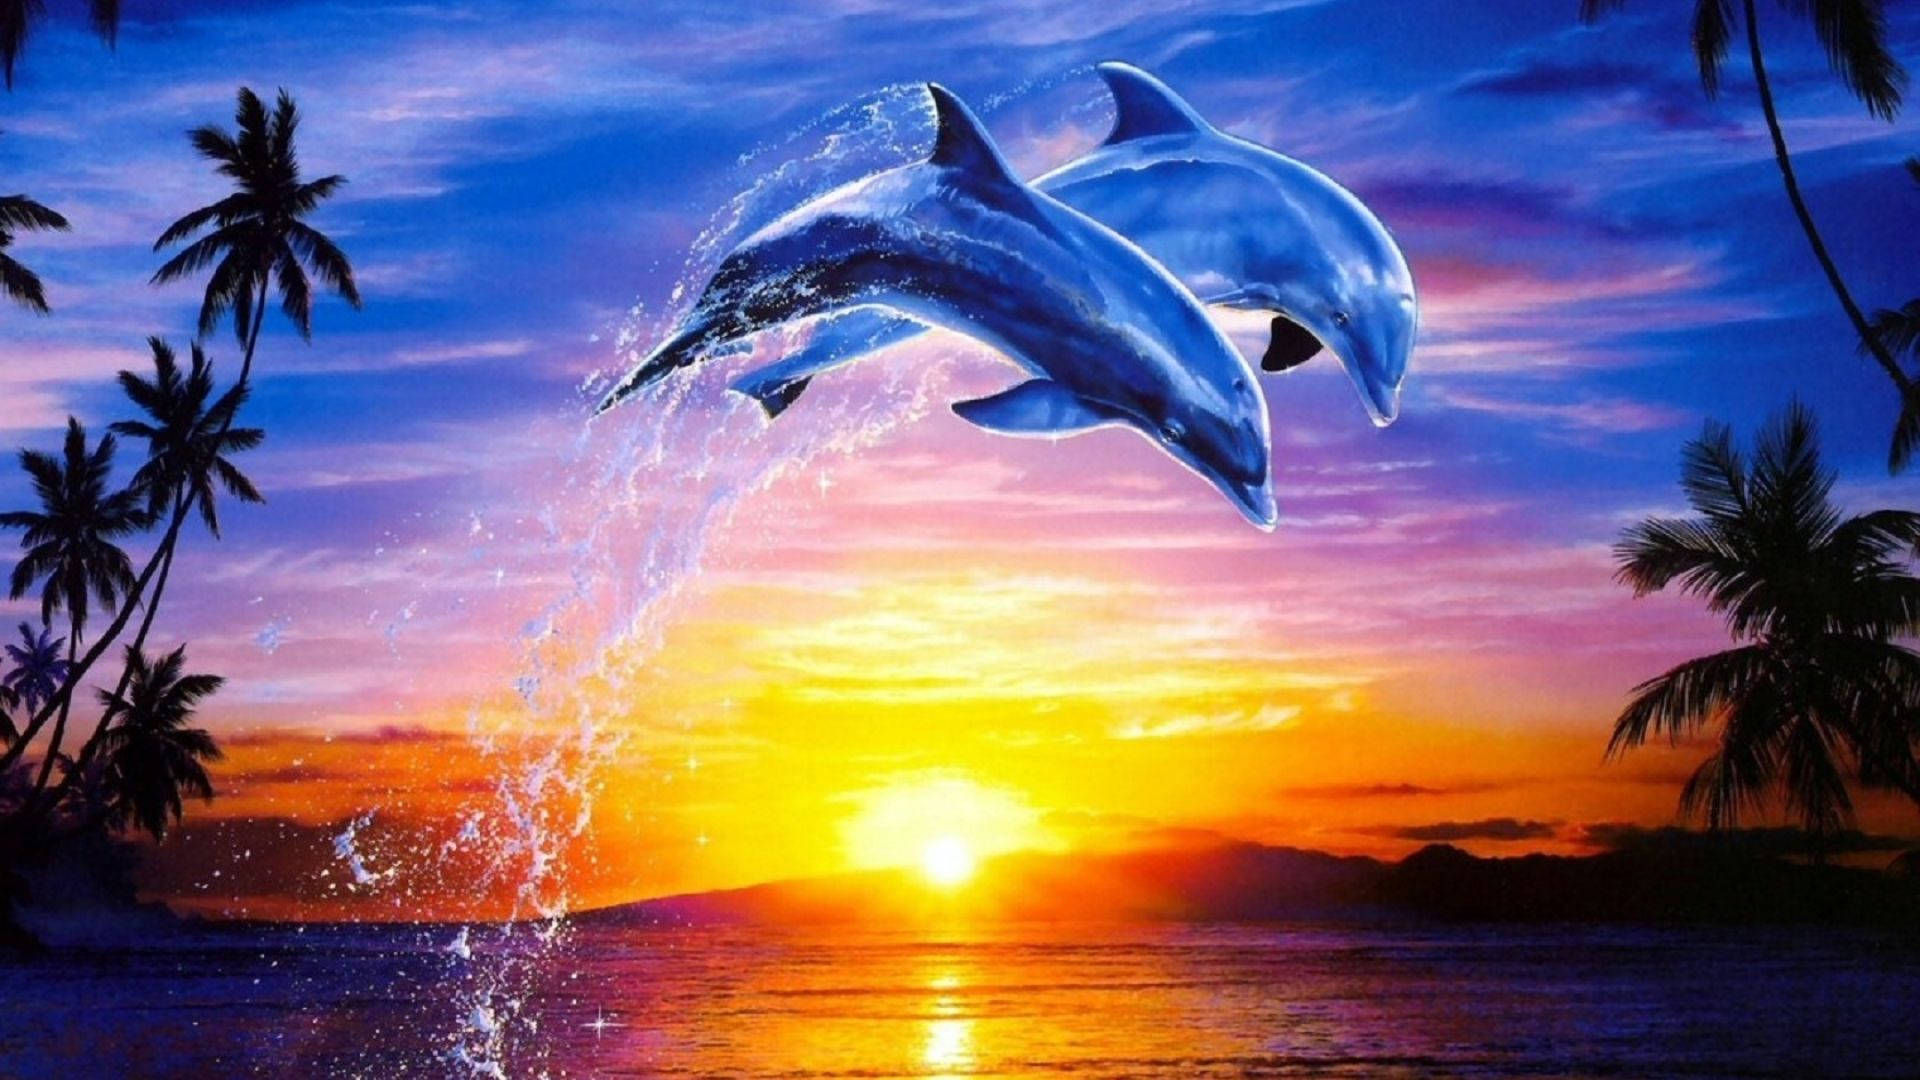 Leaping Dolphins At Sunset Background